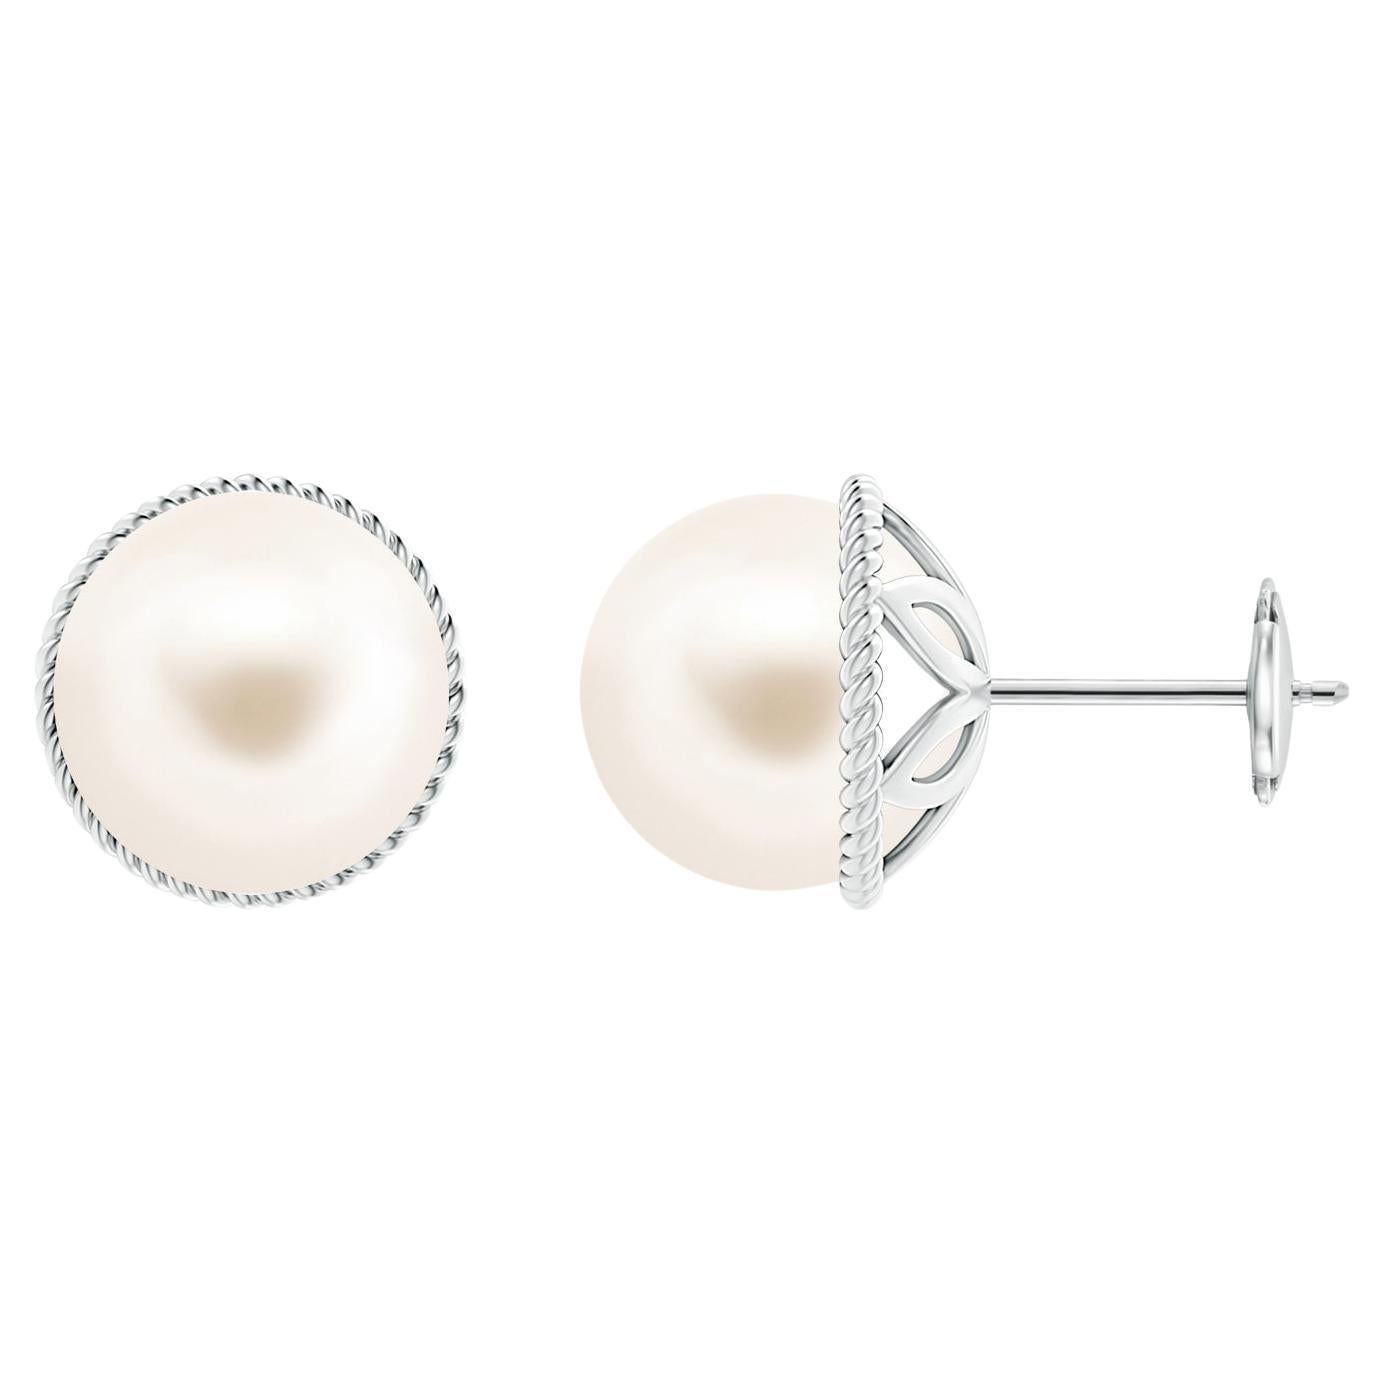 Freshwater Cultured Pearl Earrings with Twisted Rope Frame in 14K White Gold